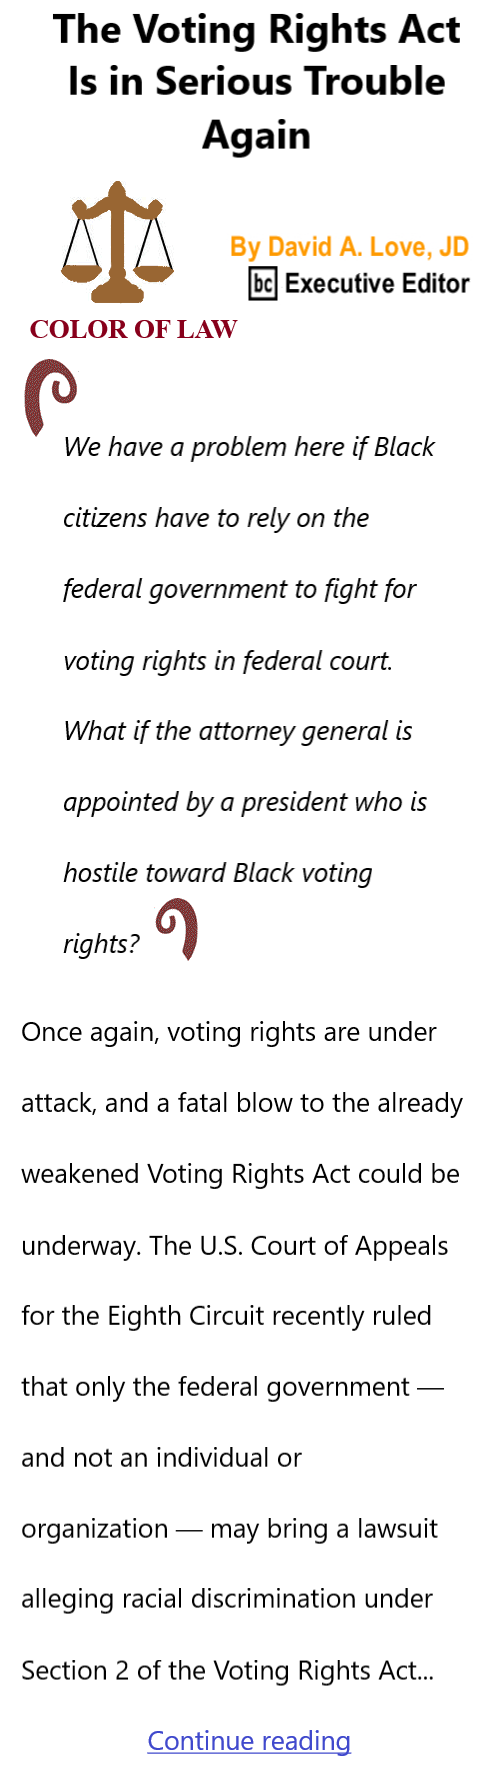 BlackCommentator.com Jan 4, 2024 - Issue 982: The Voting Rights Act Is in Serious Trouble — Again - Color of Law By David A. Love, JD, BC Executive Editor